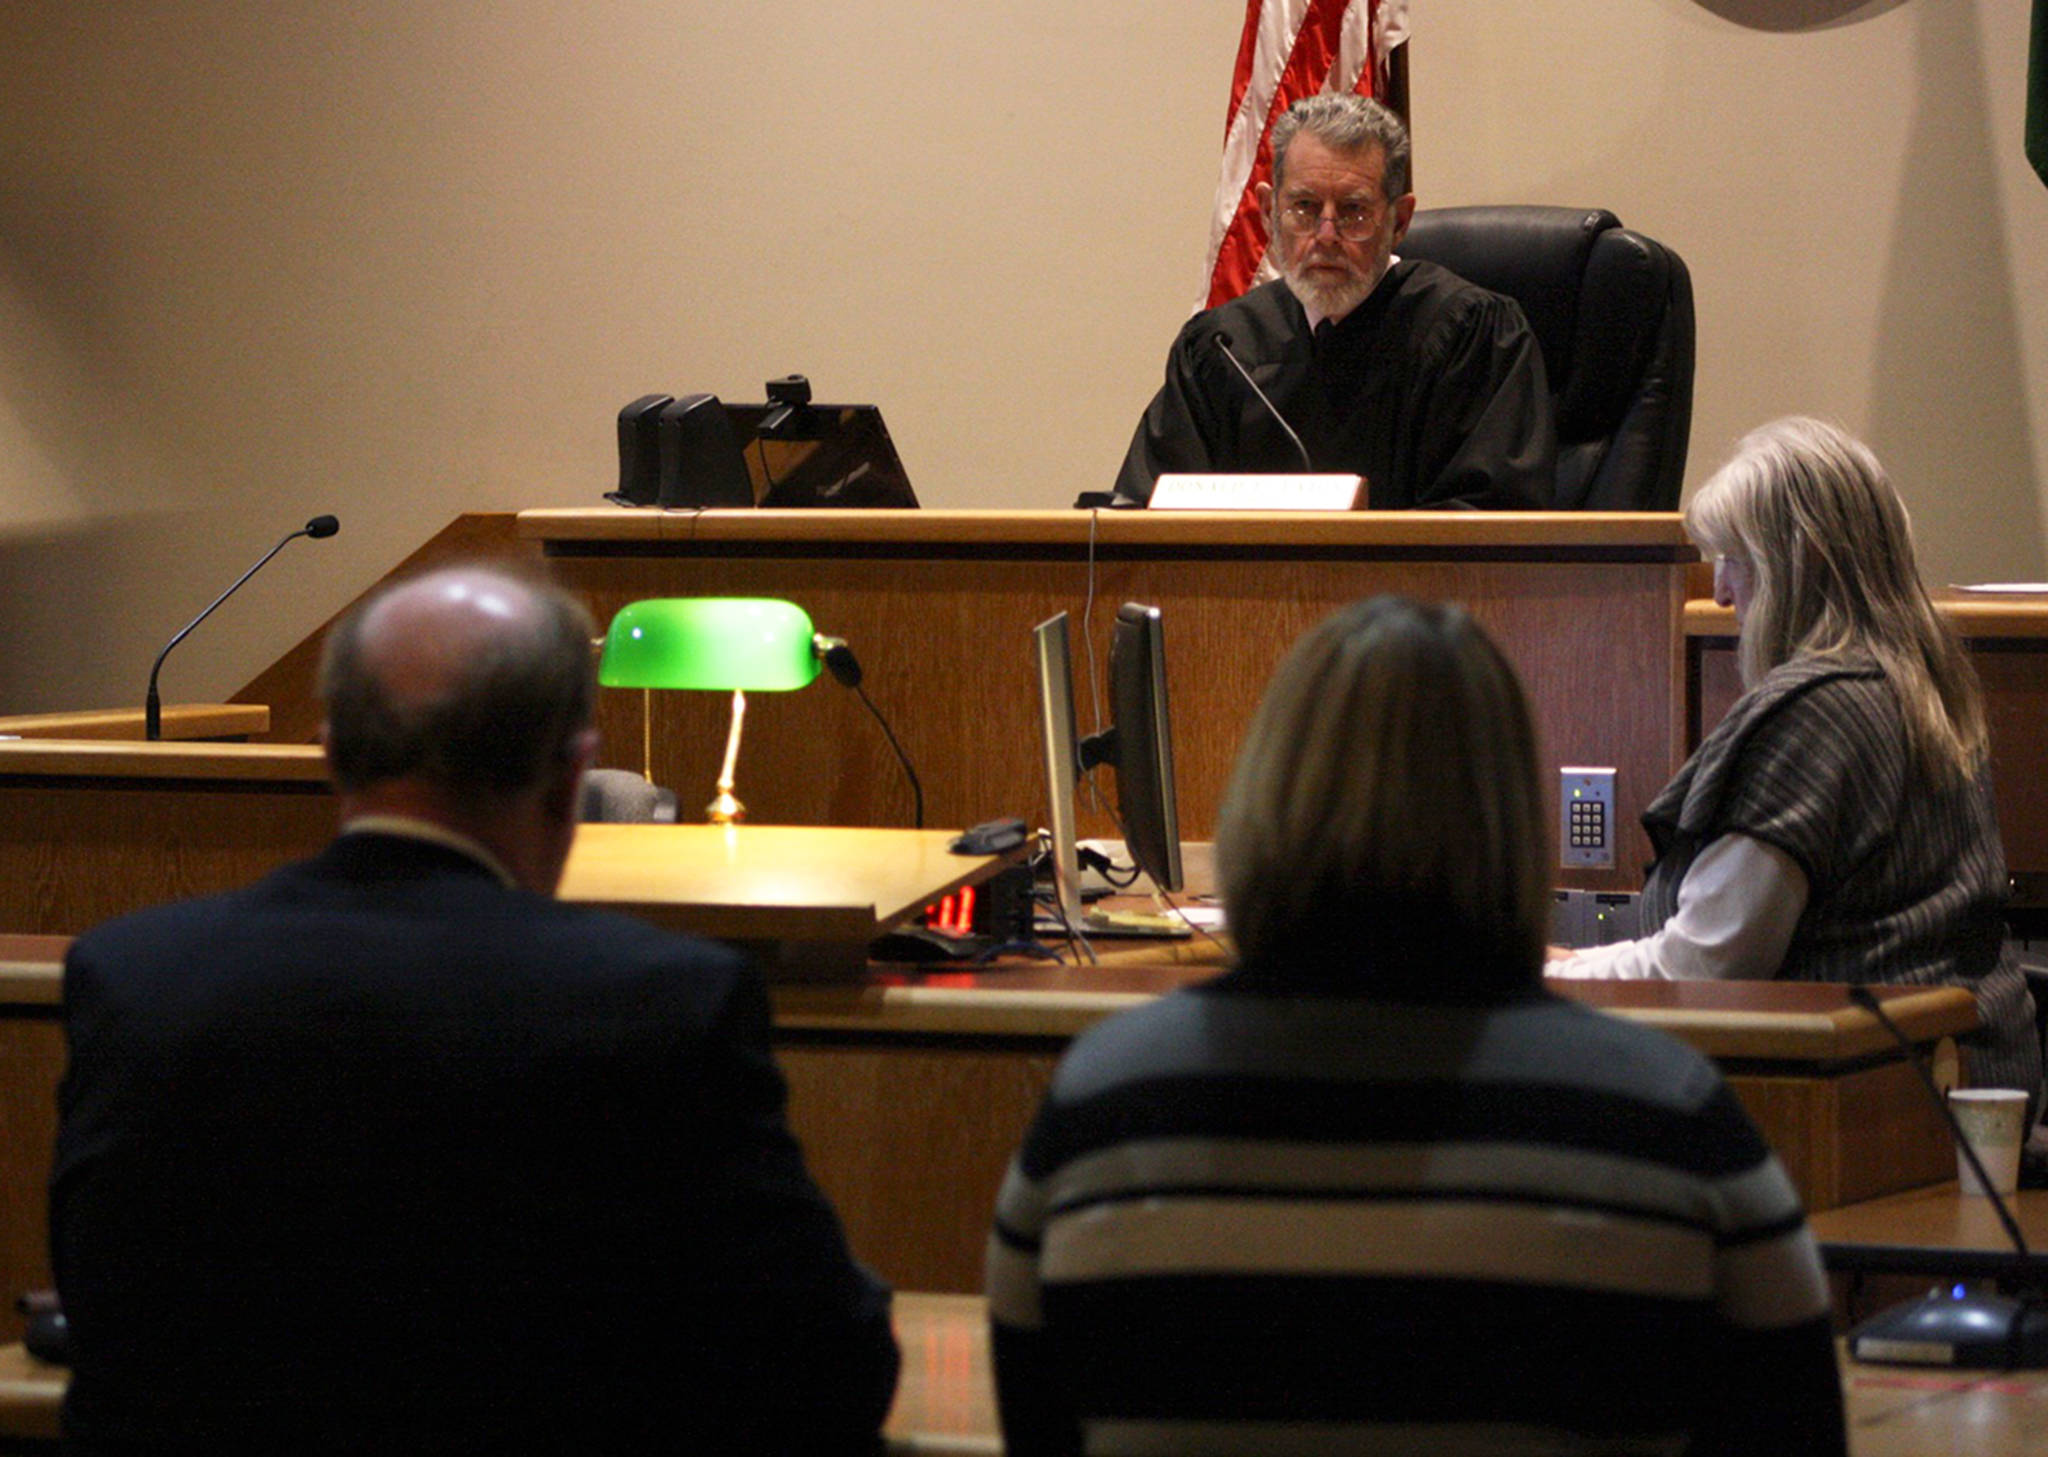 Friday Harbor woman pleads not guilty to child rape in the third degree